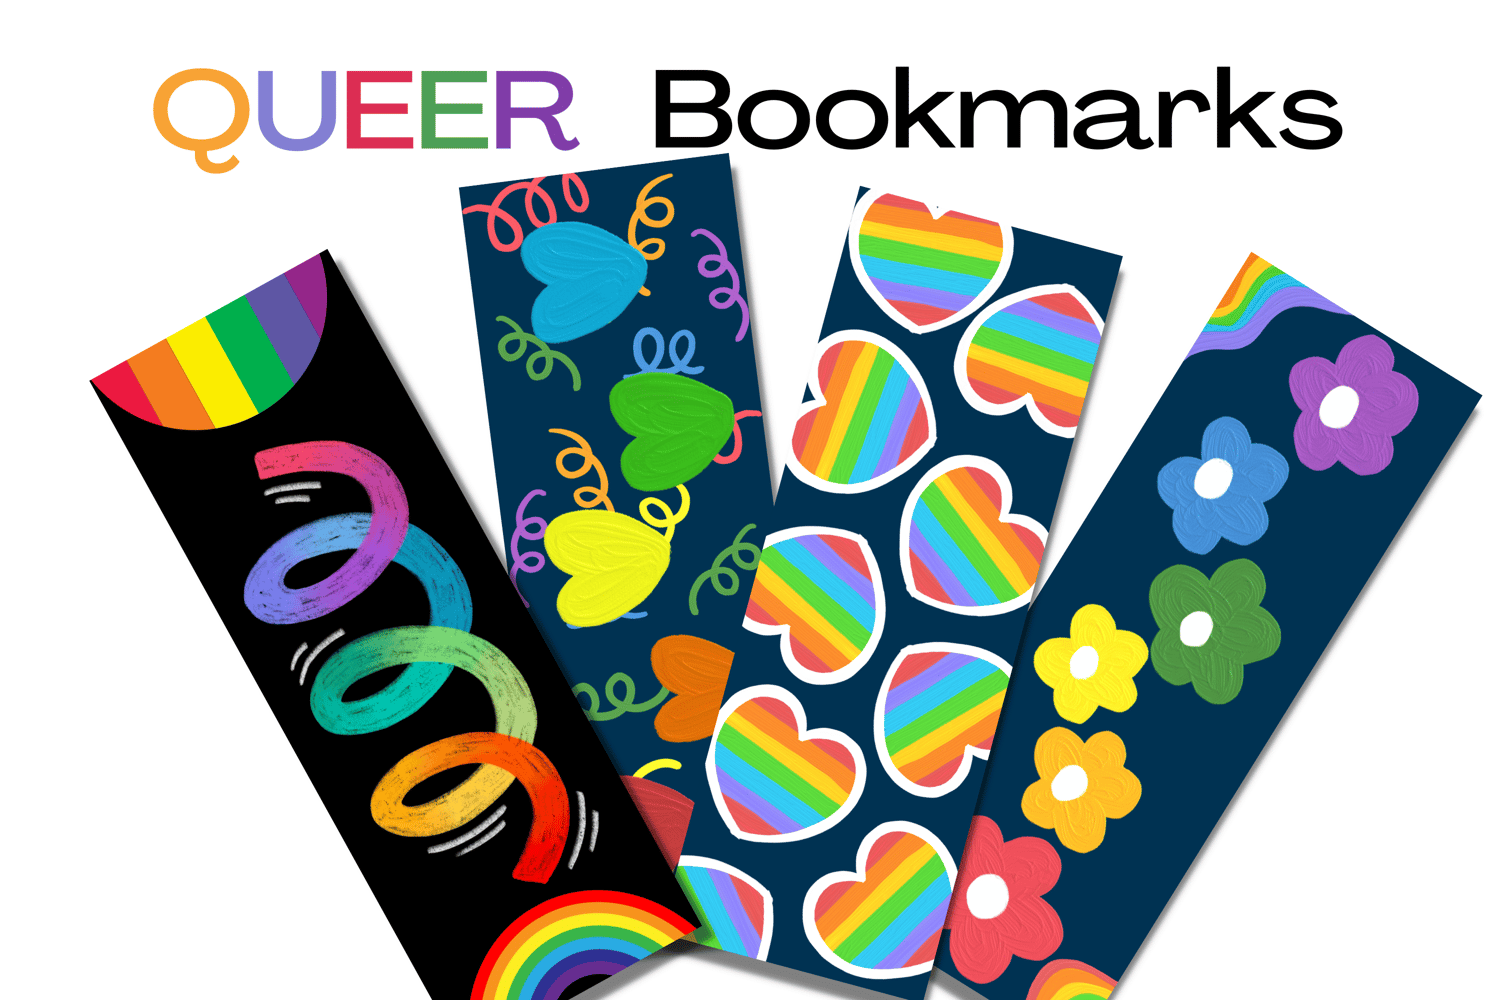 queer bookmarks, gay bookmarks, pride gift, gay gift ideas, gay readers, lgbt bookmarks, rainbow bookmarks, printable pride gifts